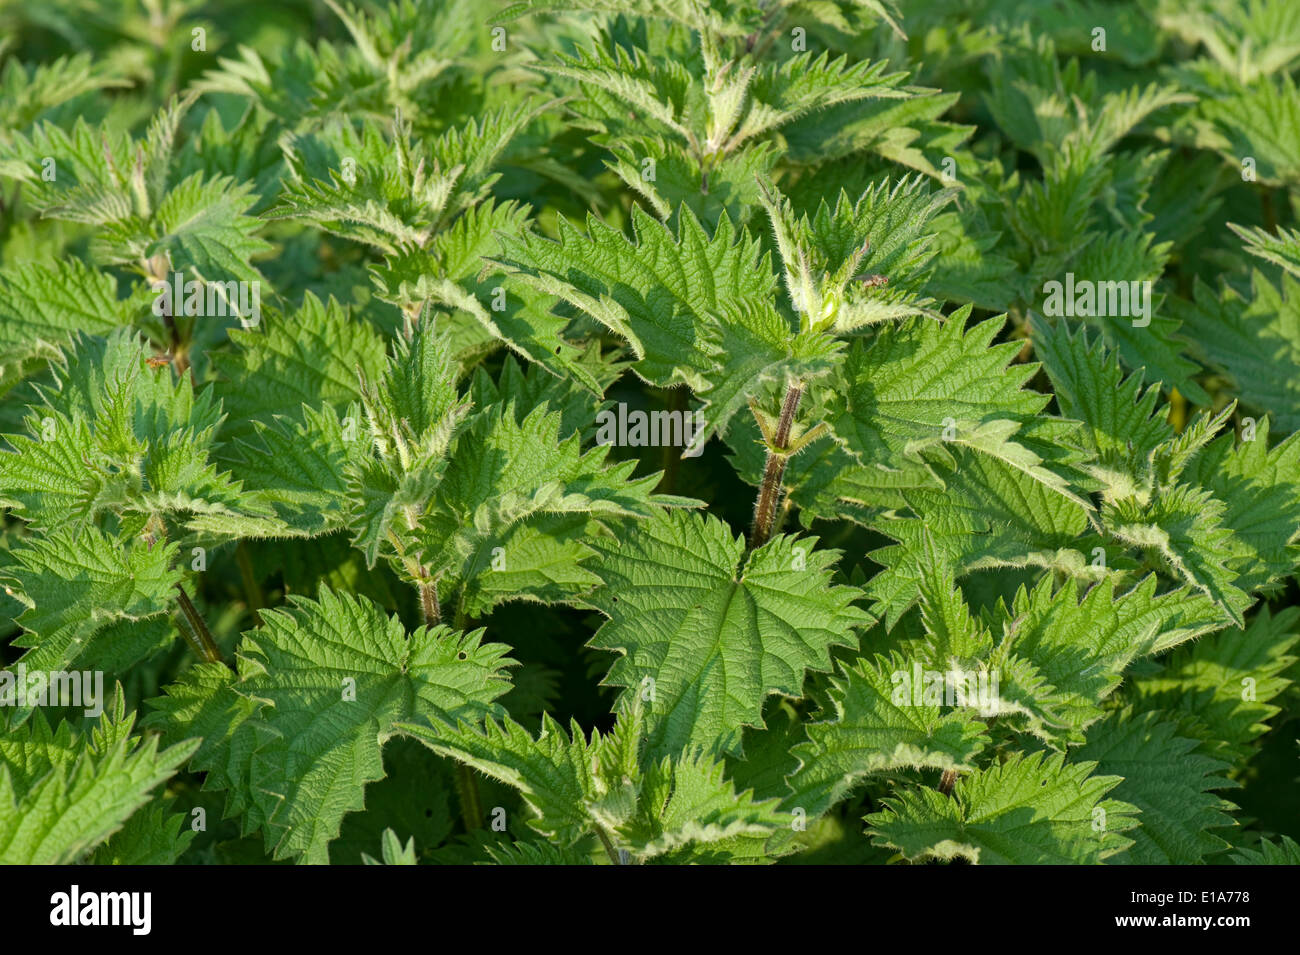 Stinging nettle, Urtica dioica, plants with healthy vigorous leaves in spring Stock Photo